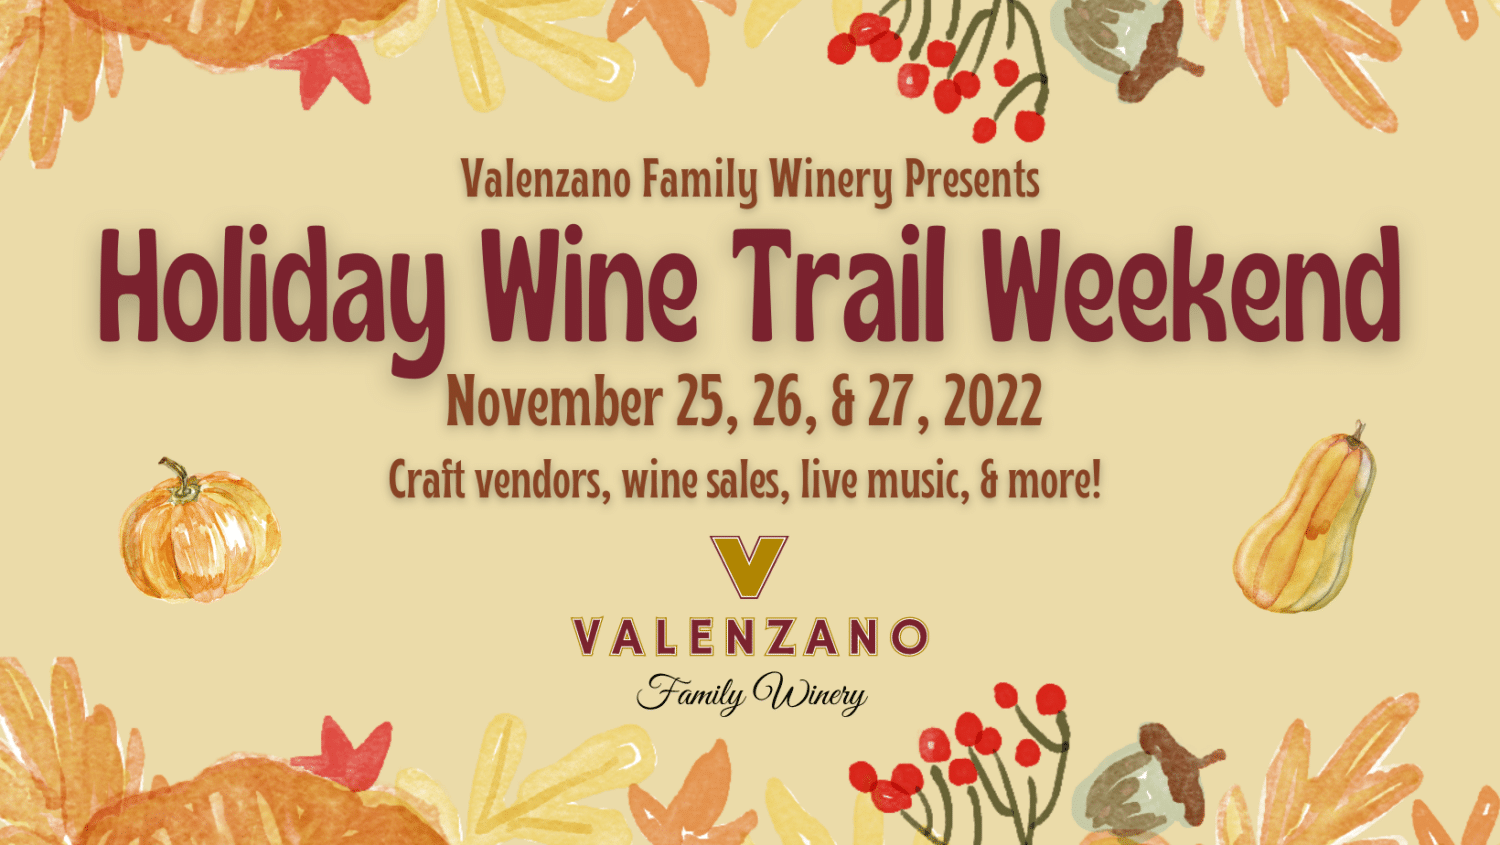 Holiday Wine Trail Weekend at Valenzano Winery Garden State Wine